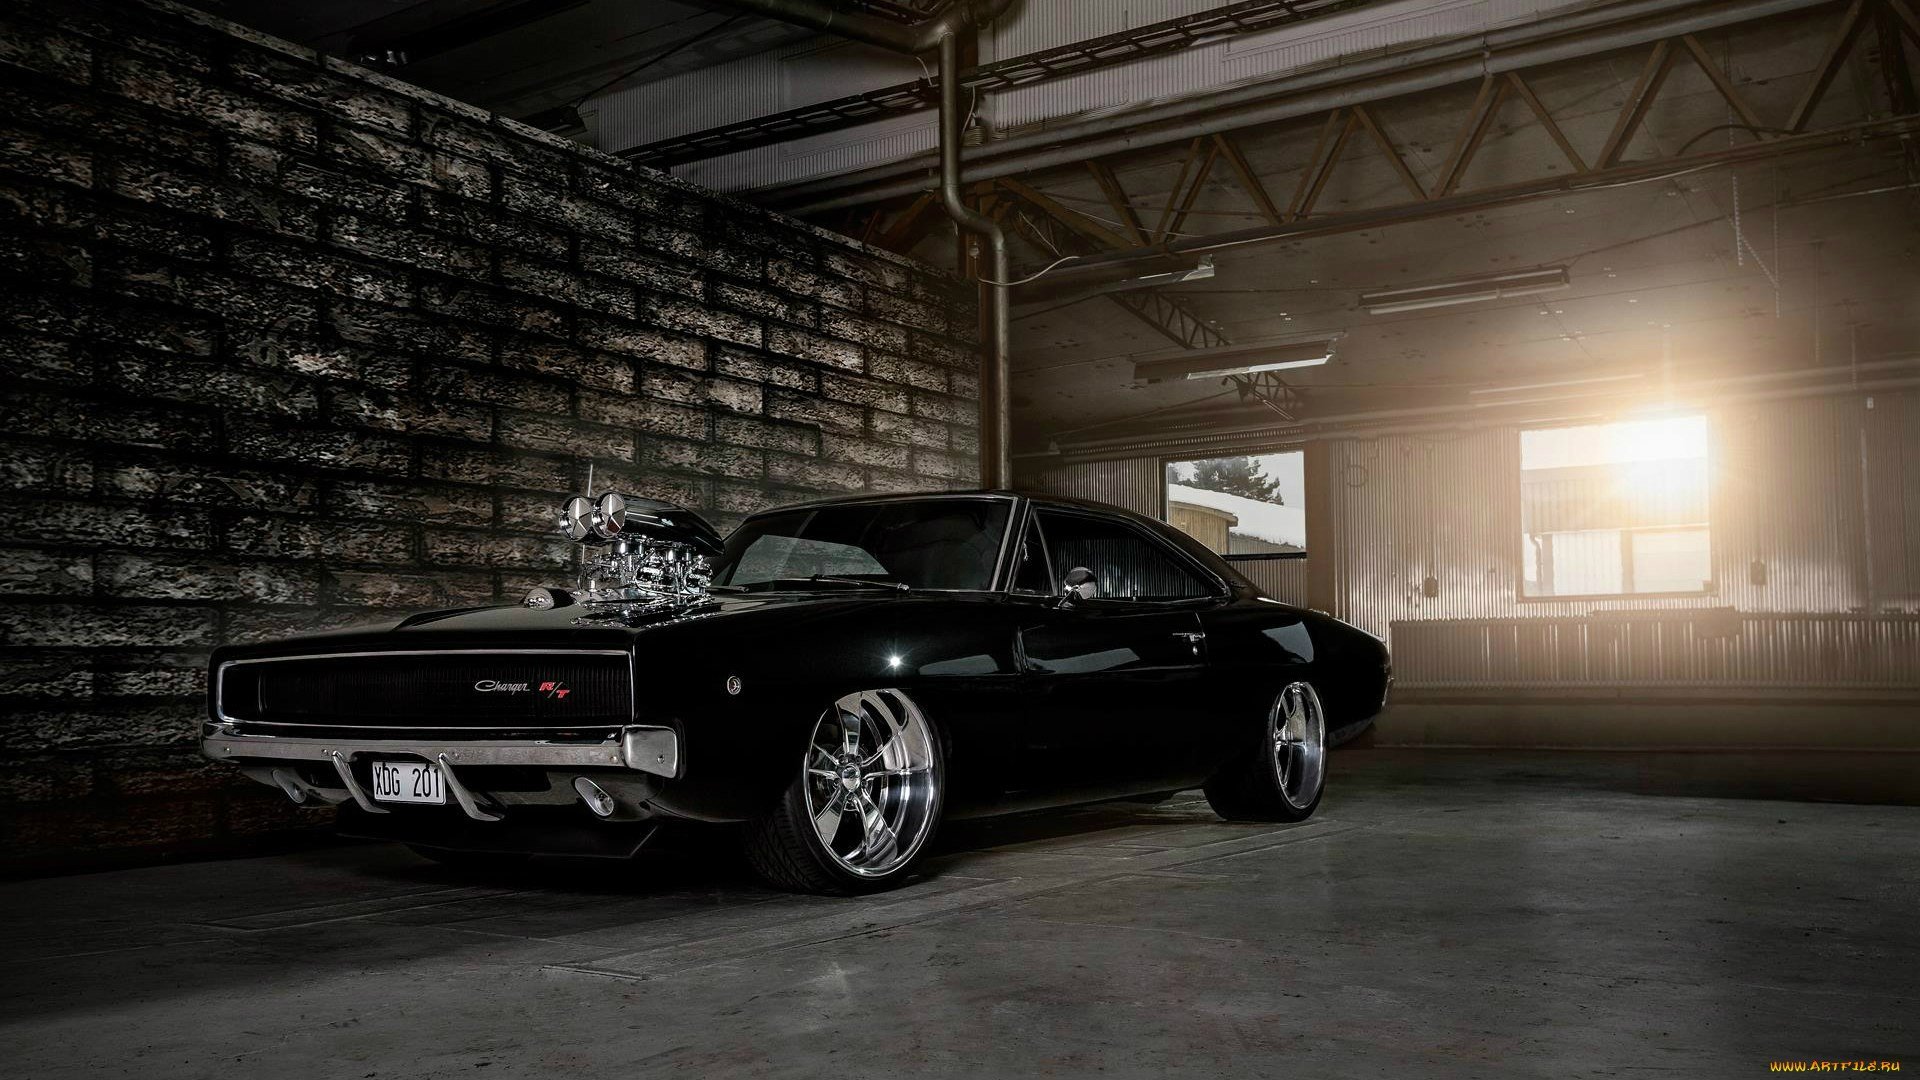 1969 Dodge Charger Fast And Furious Wallpaper Engine Information